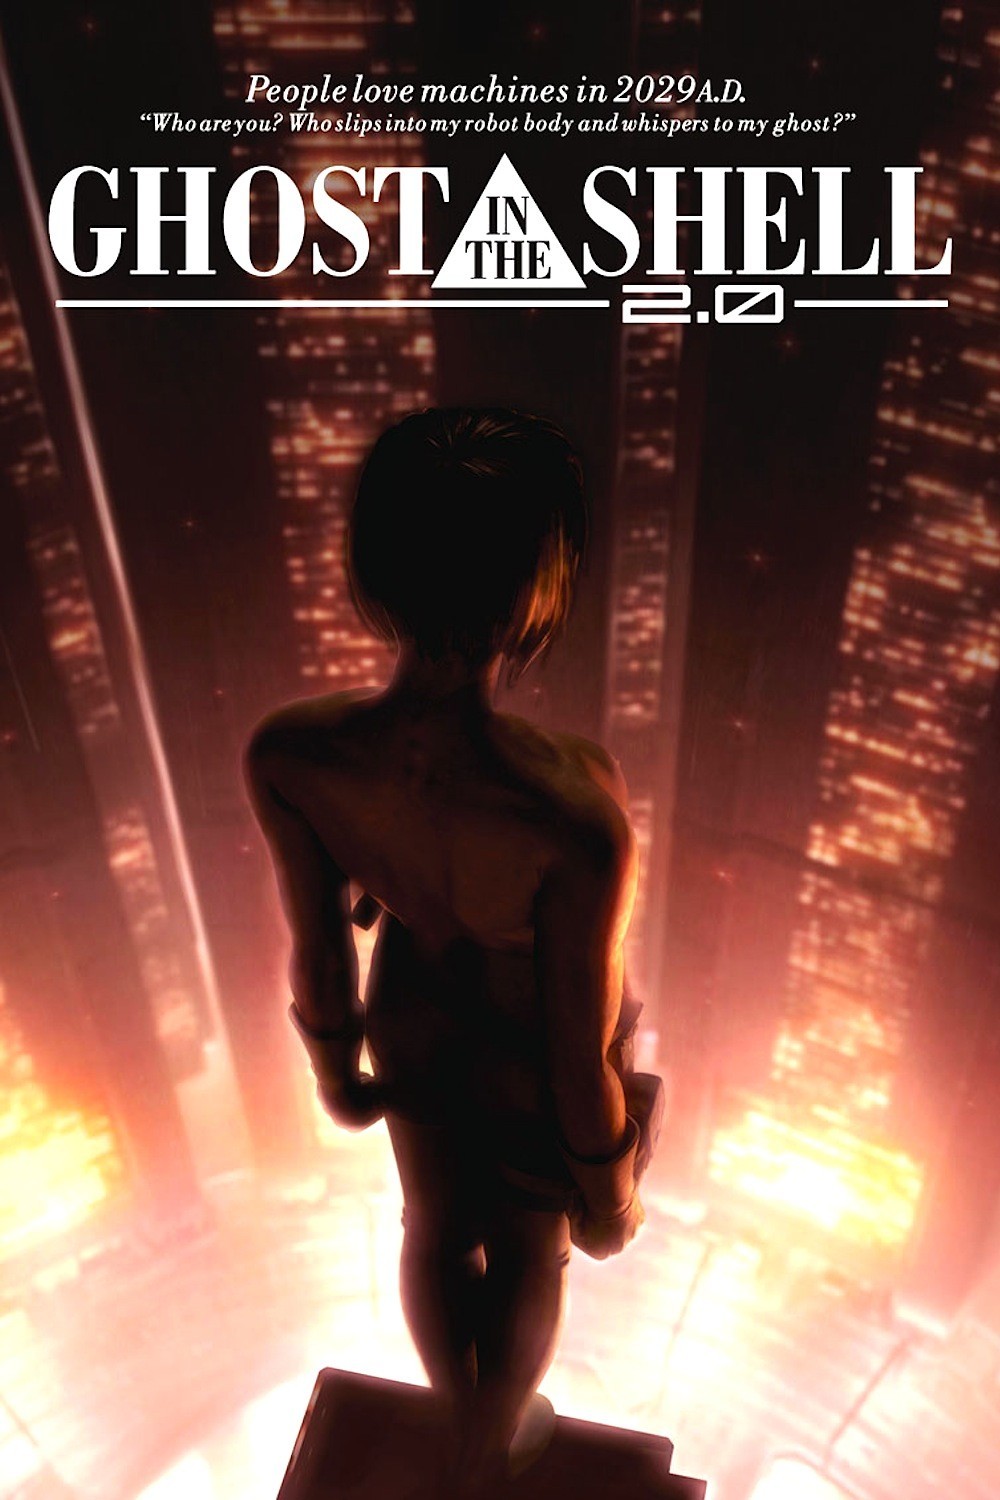 affiche du film Ghost In The Shell 2.0